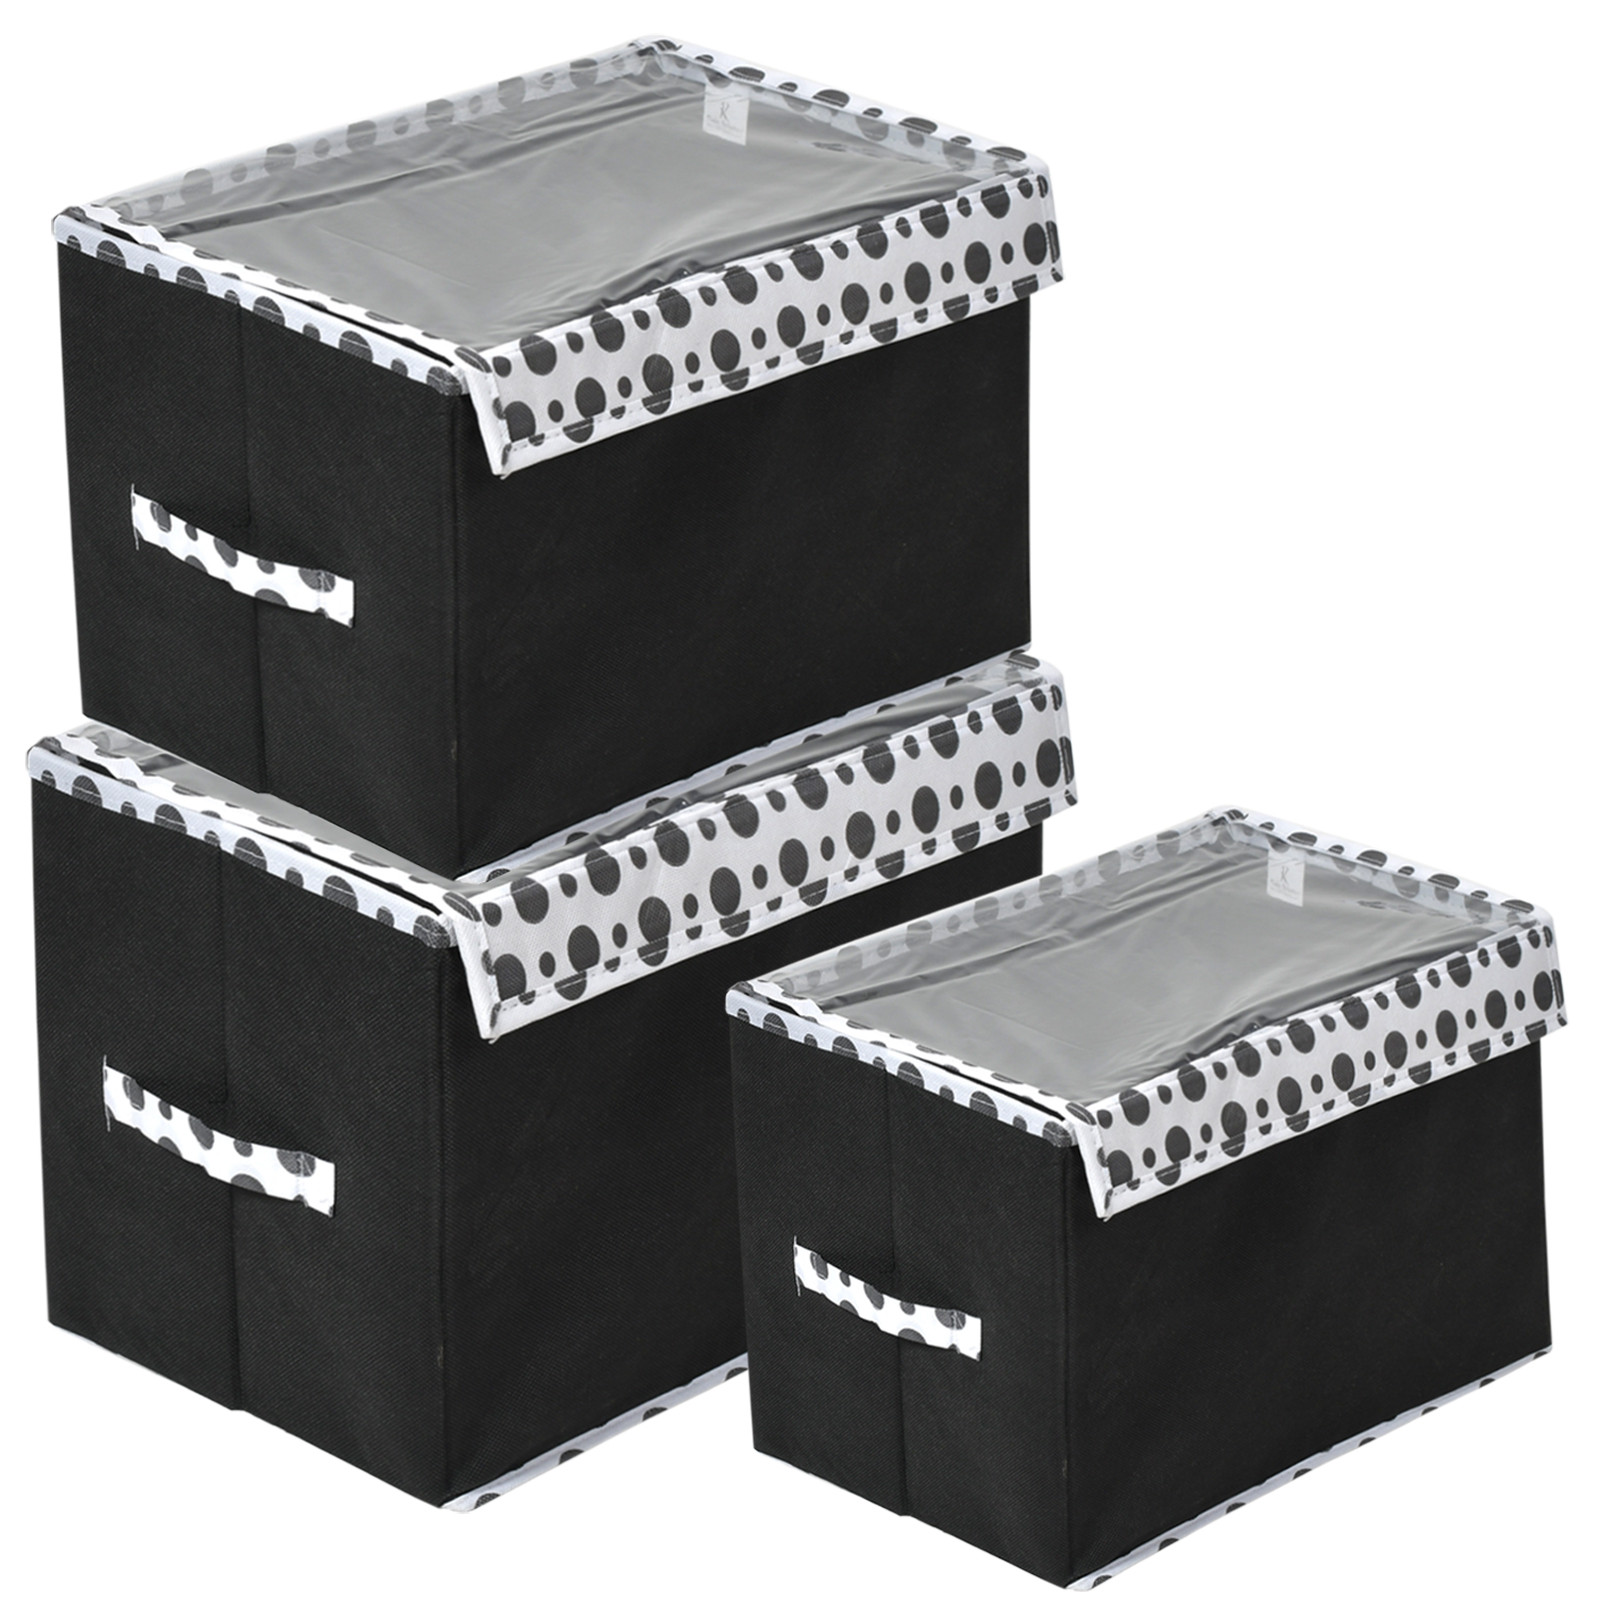 Kuber Industries Dot Printed Multiuses 3 Different Sizes Non-Woven Storage Box/Organizer With Tranasparent Lid- Set of 3 (Black) -44KM0427